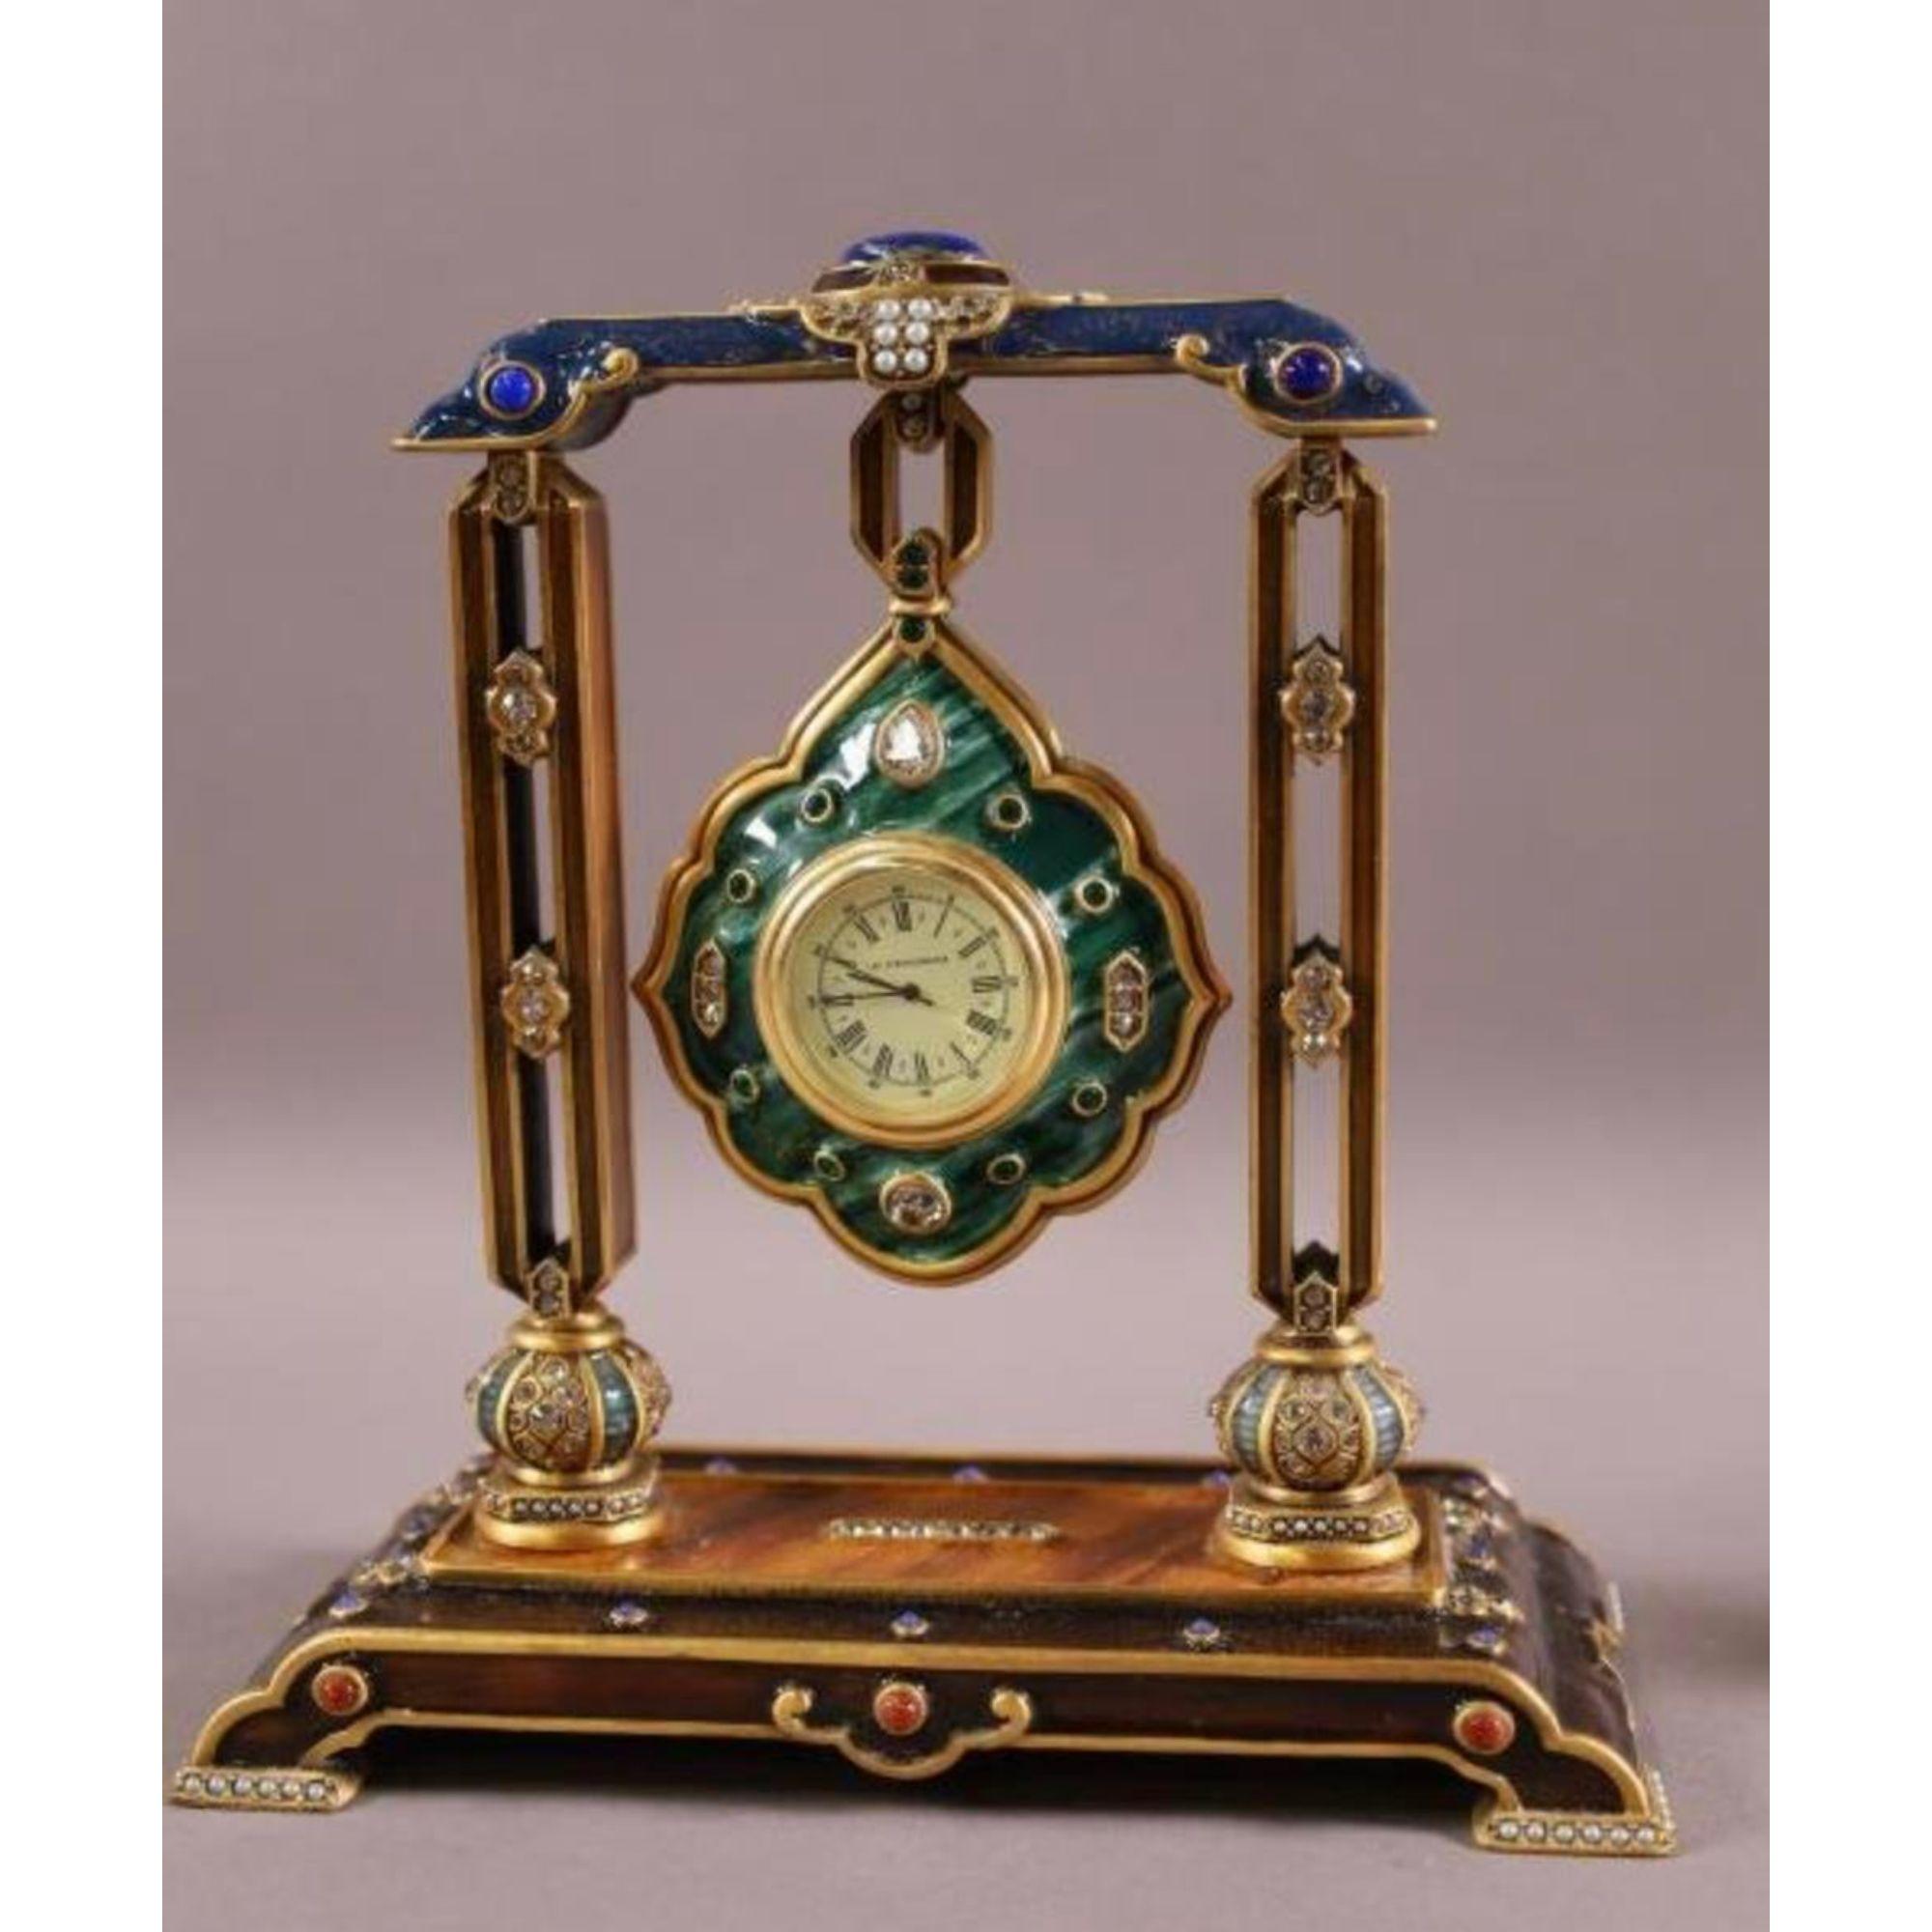 Rare Estate Jay Strongwater Harrison hanging pendant clock

Additional information: 
Materials: Bronze, Enamel
Color: Green
Period: 2000 - 2009
Styles: French 
Item type: Vintage, antique or pre-owned
Dimensions: 7